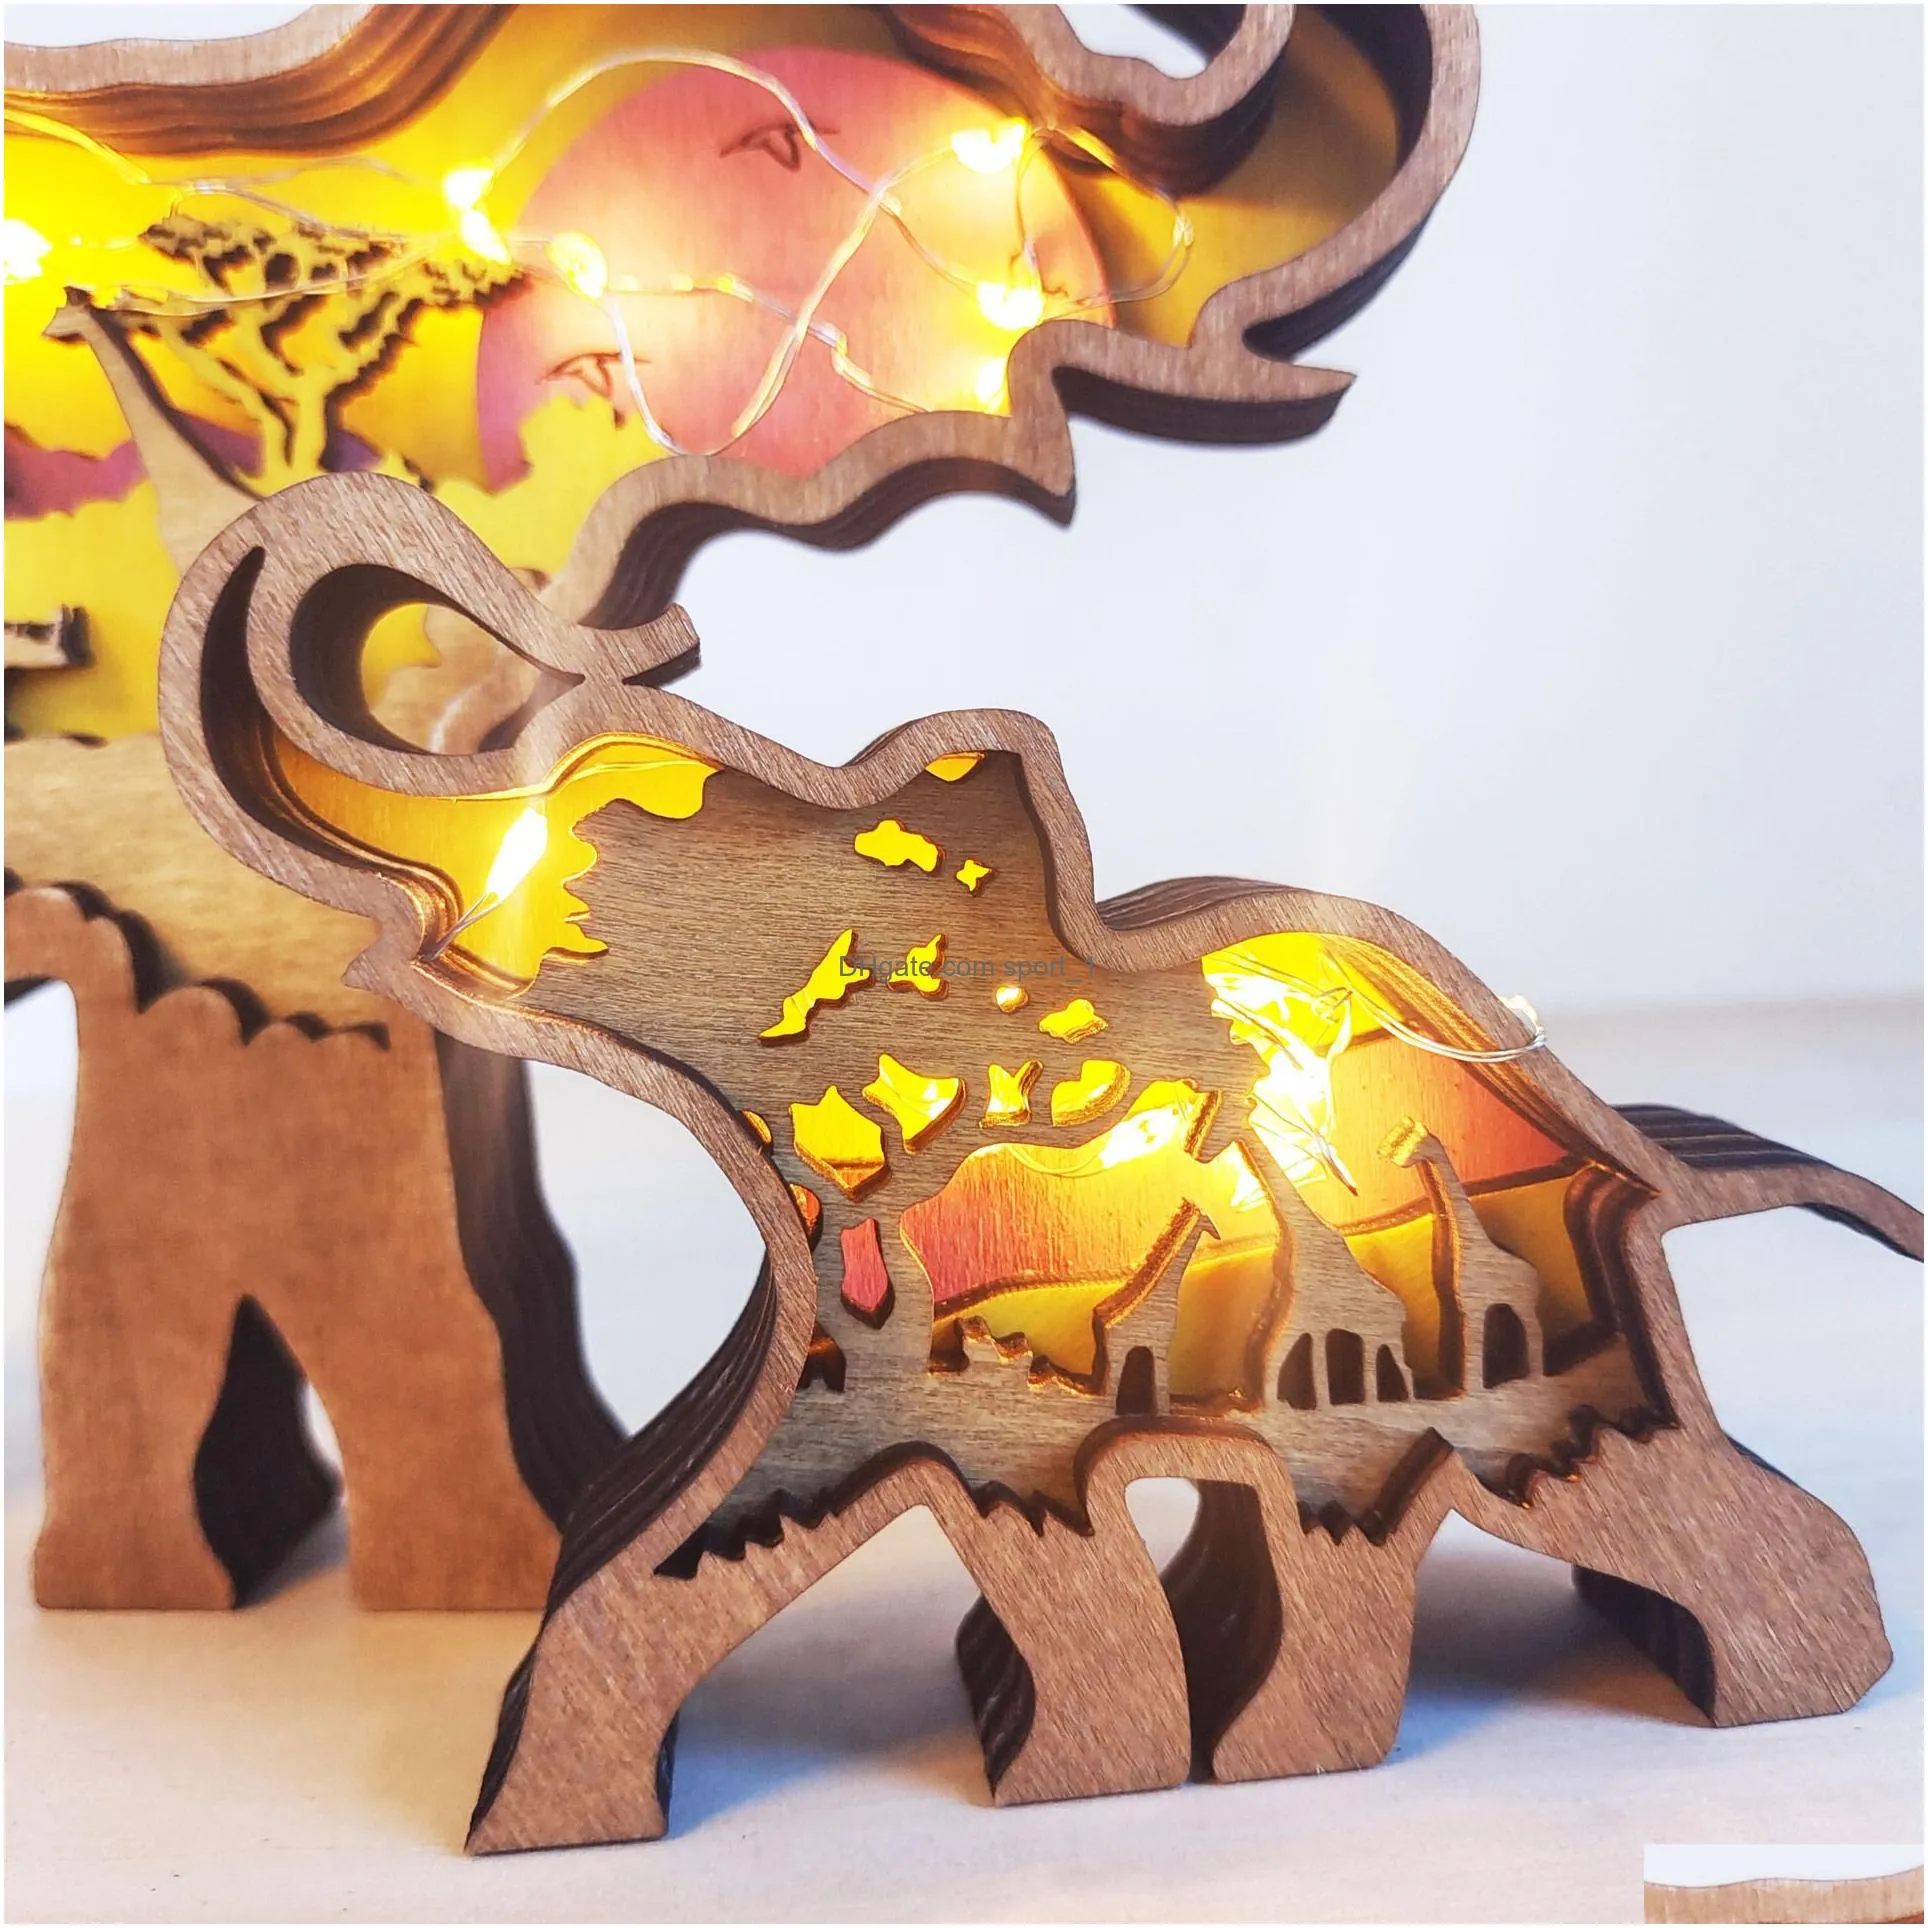 mon and son elephant craft 3d laser cut wood material home decor gift art crafts set forest animal table decoration elepants statues ornaments room